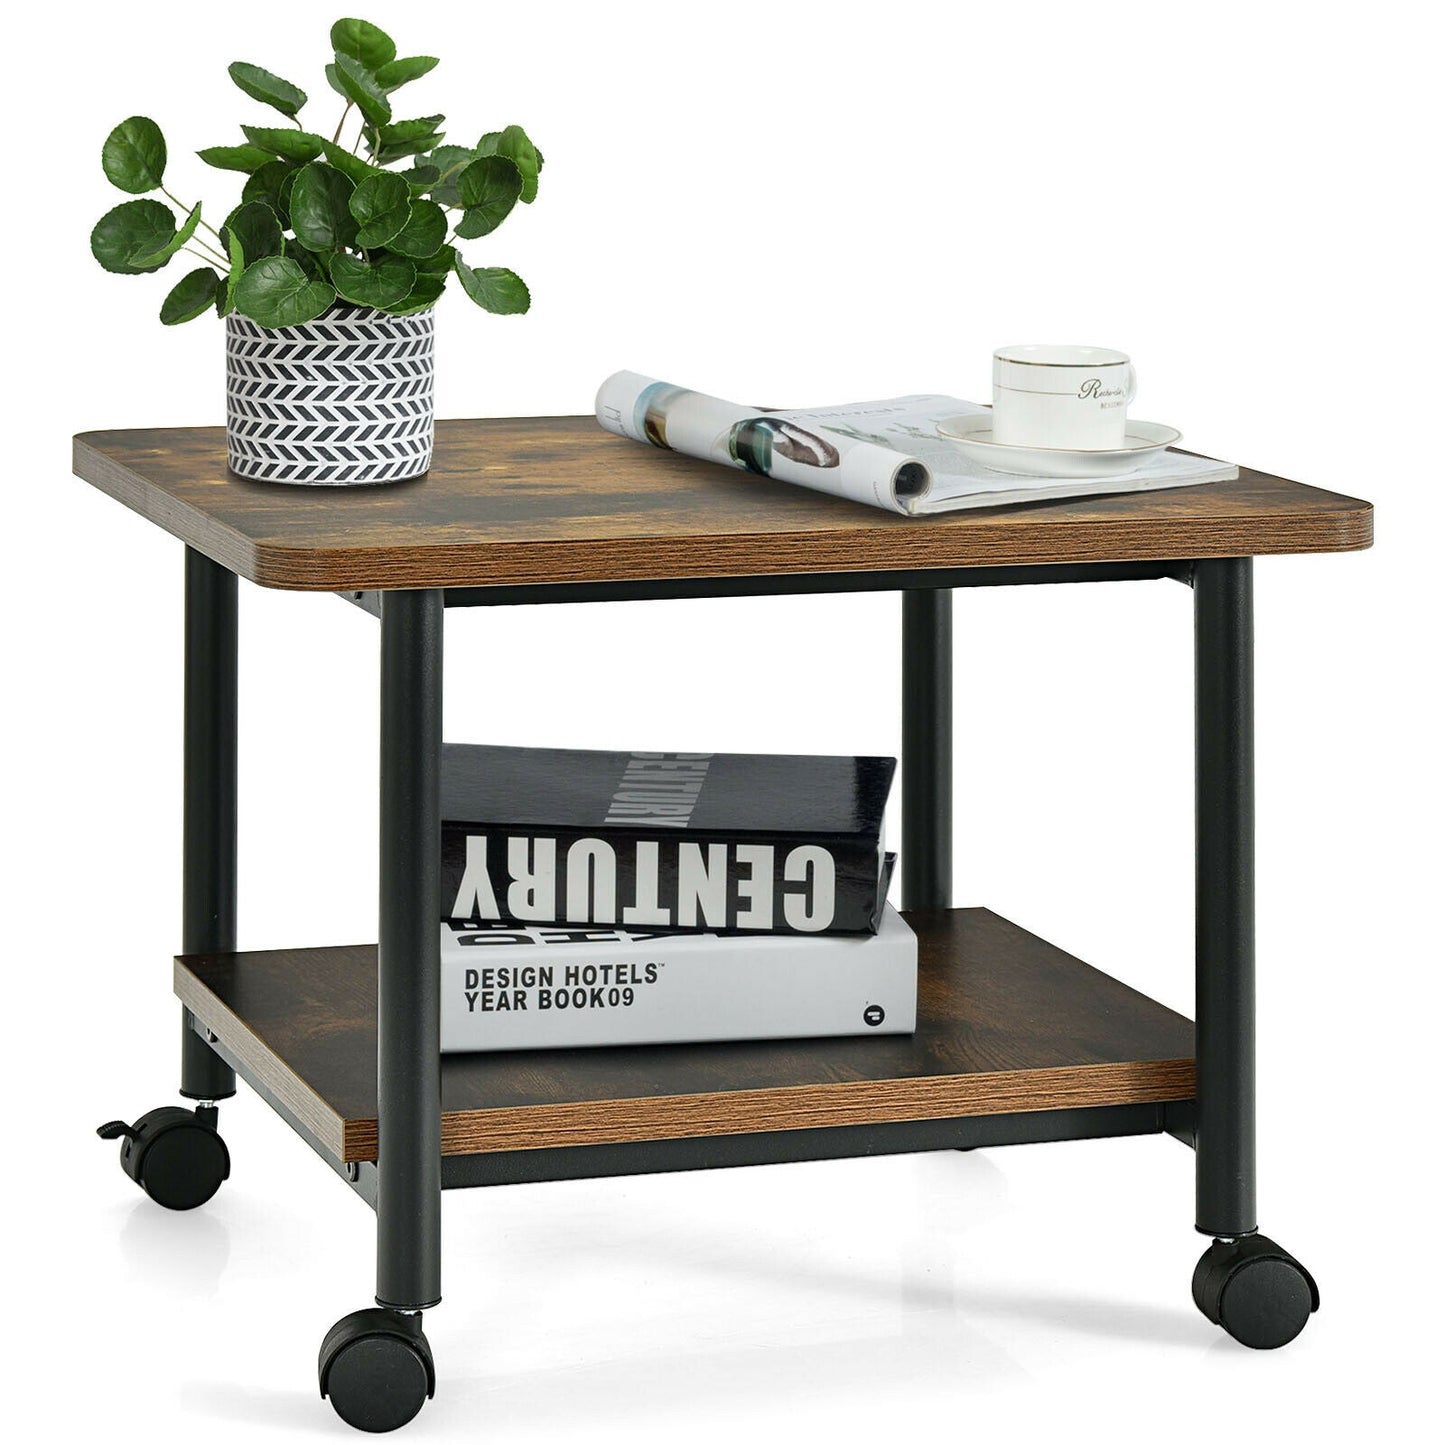 2 Tier Wooden Printer Stand with 360° Swivel Casters-Brown